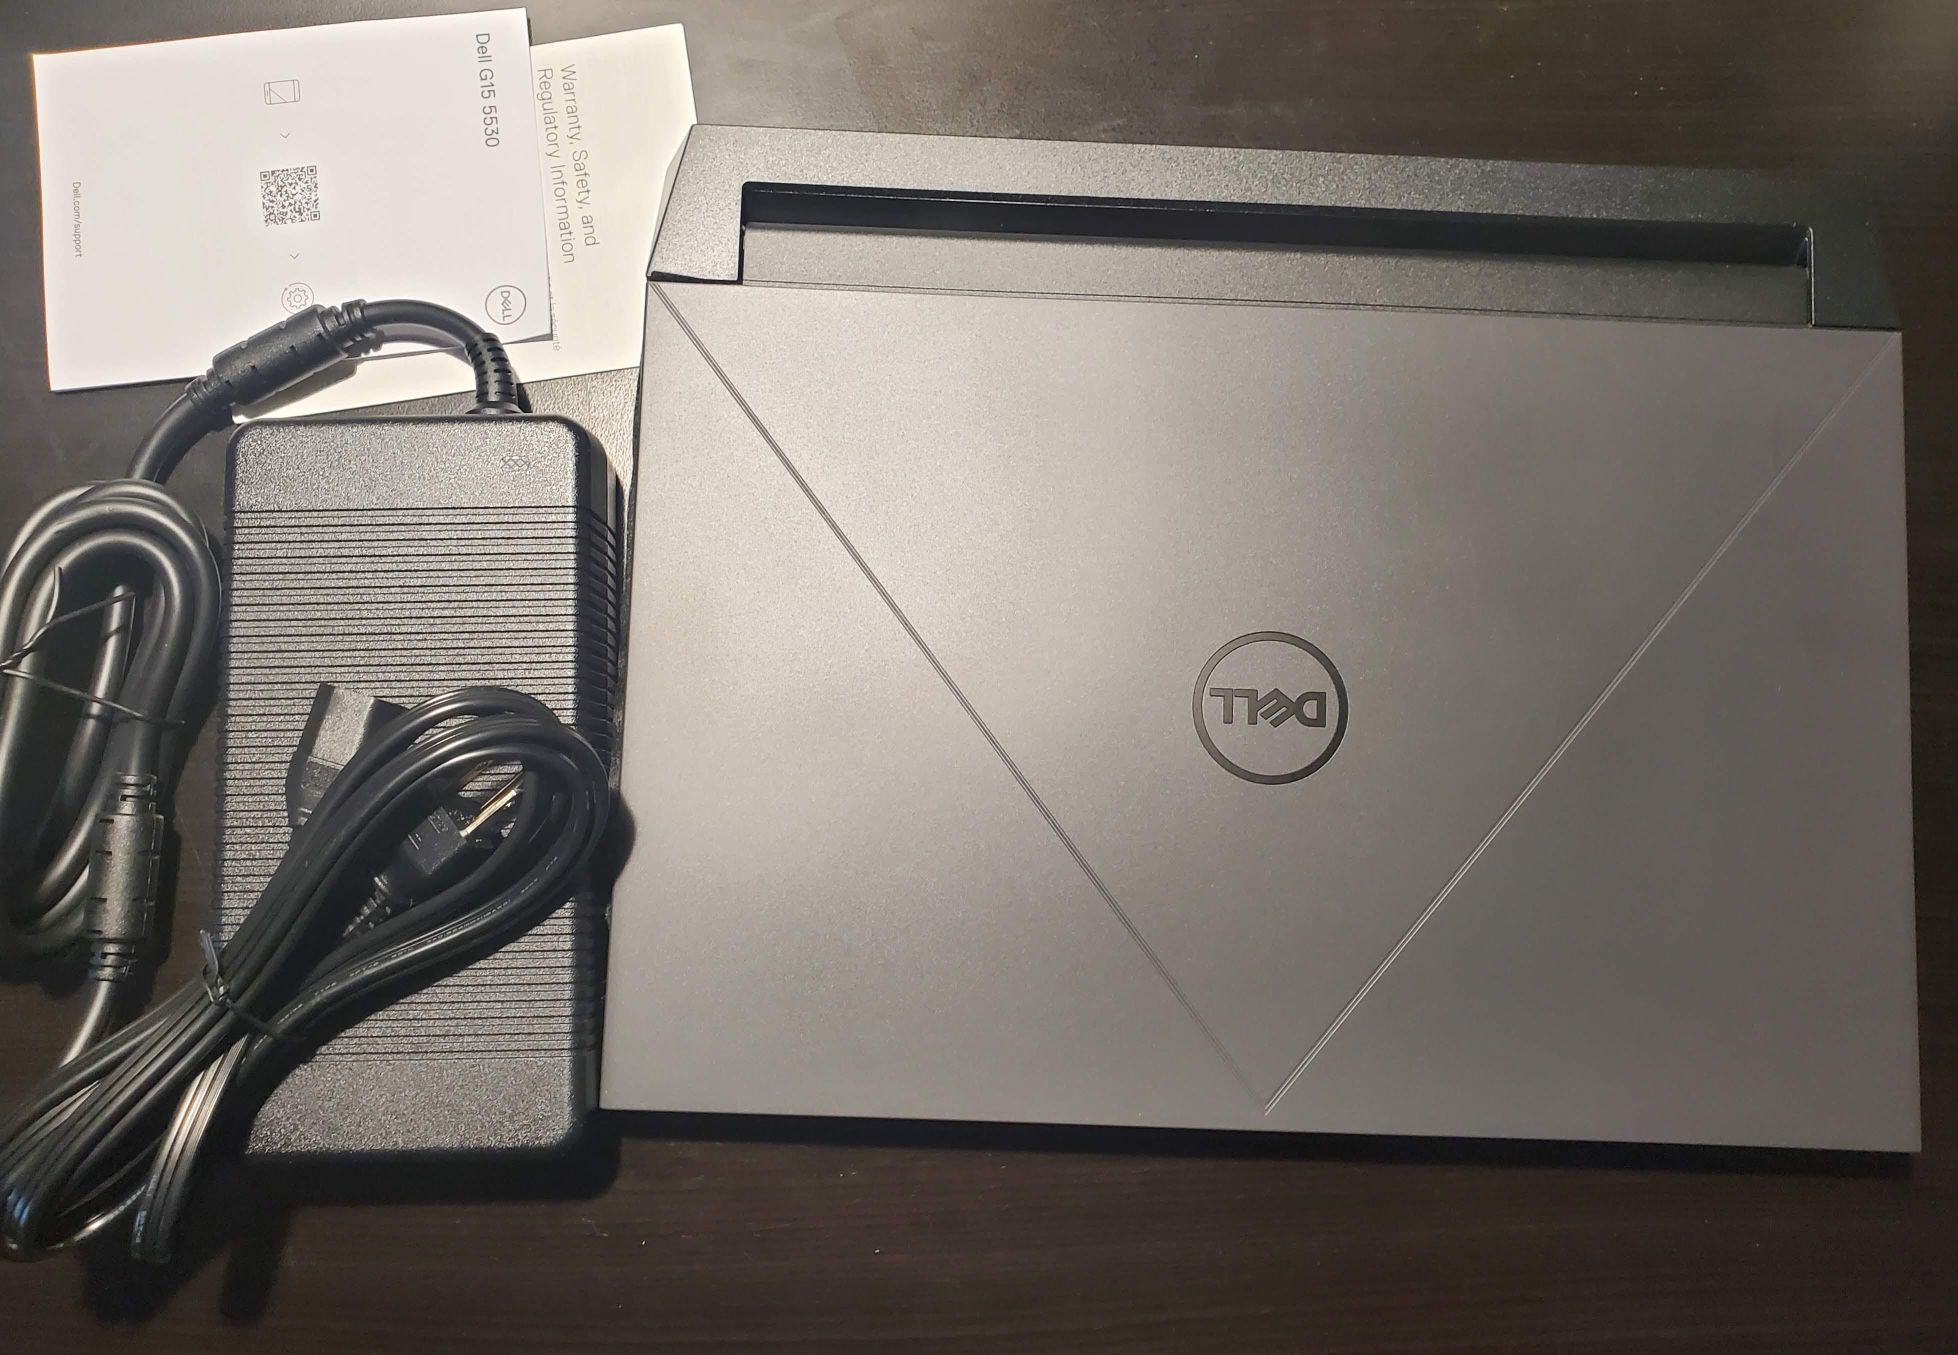 Dell G15 15.6" FHD 120Hz Gaming Laptop